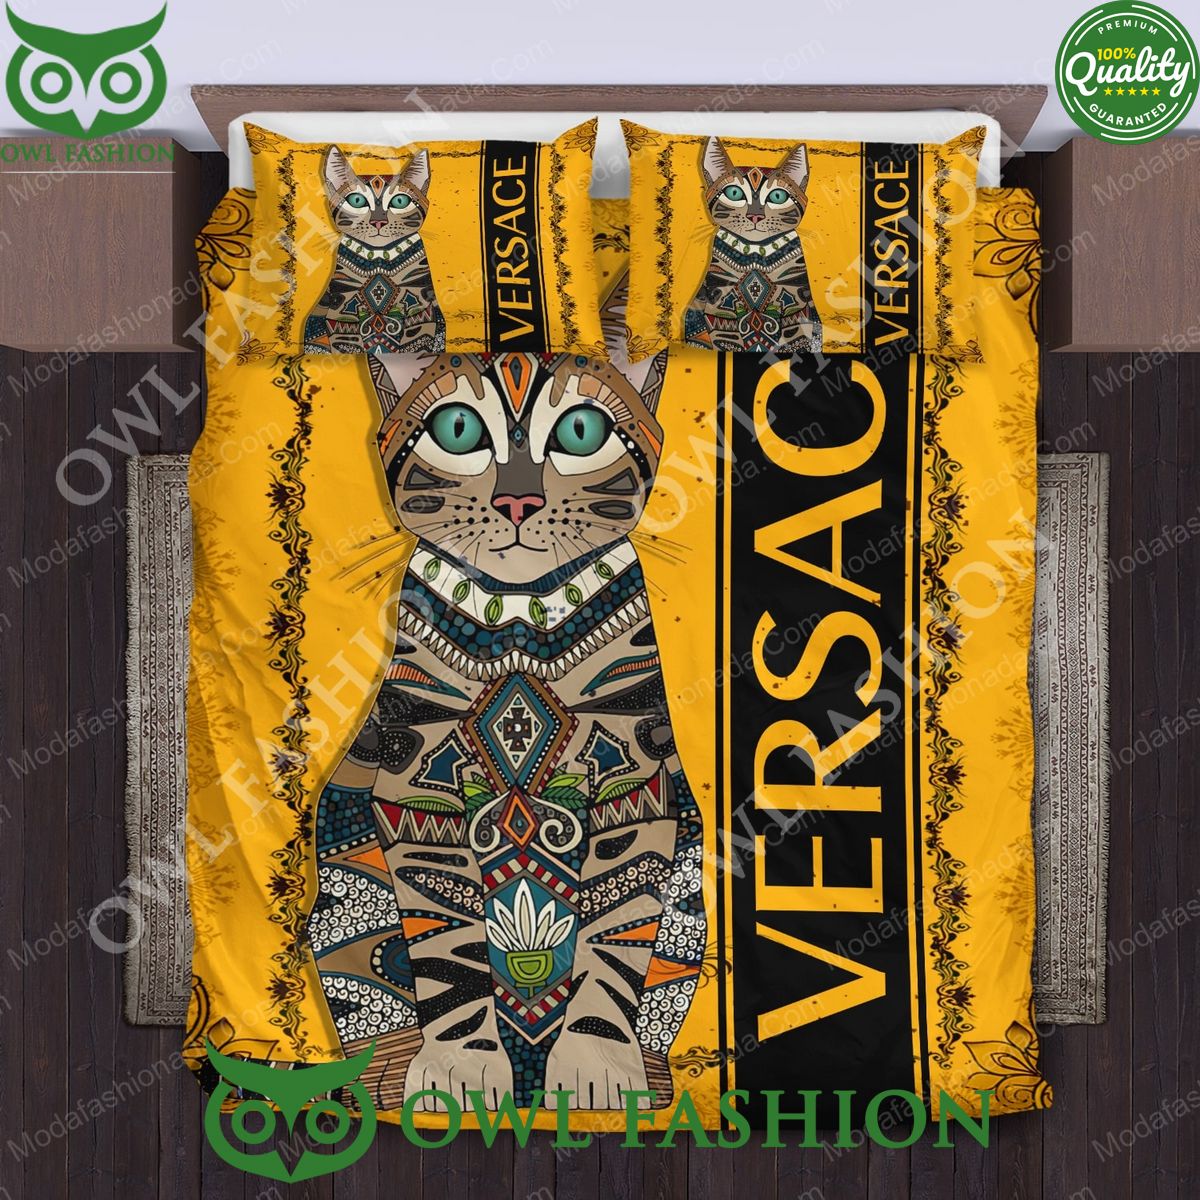 Bengal Versace Limited Luxury Bedding Sets Nice Pic